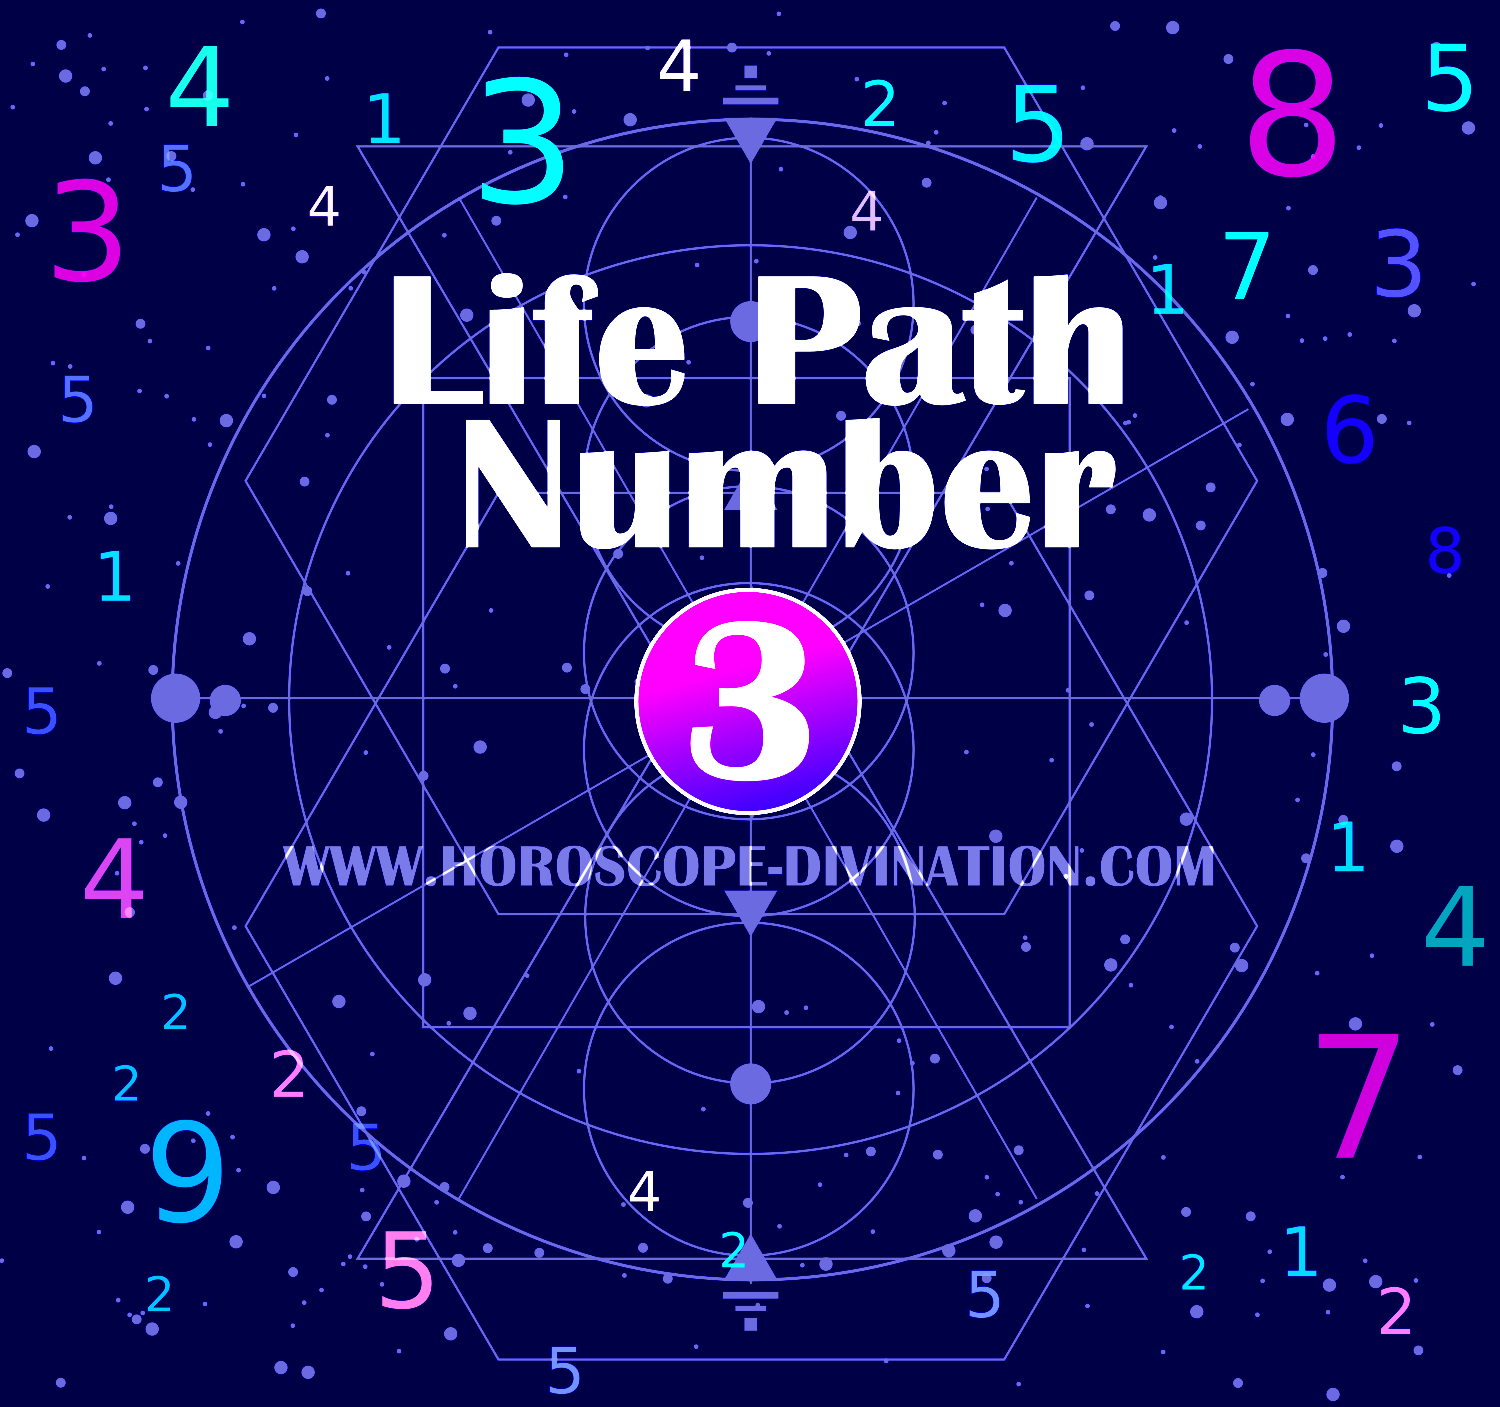 Life Path Number 3 - Numerology